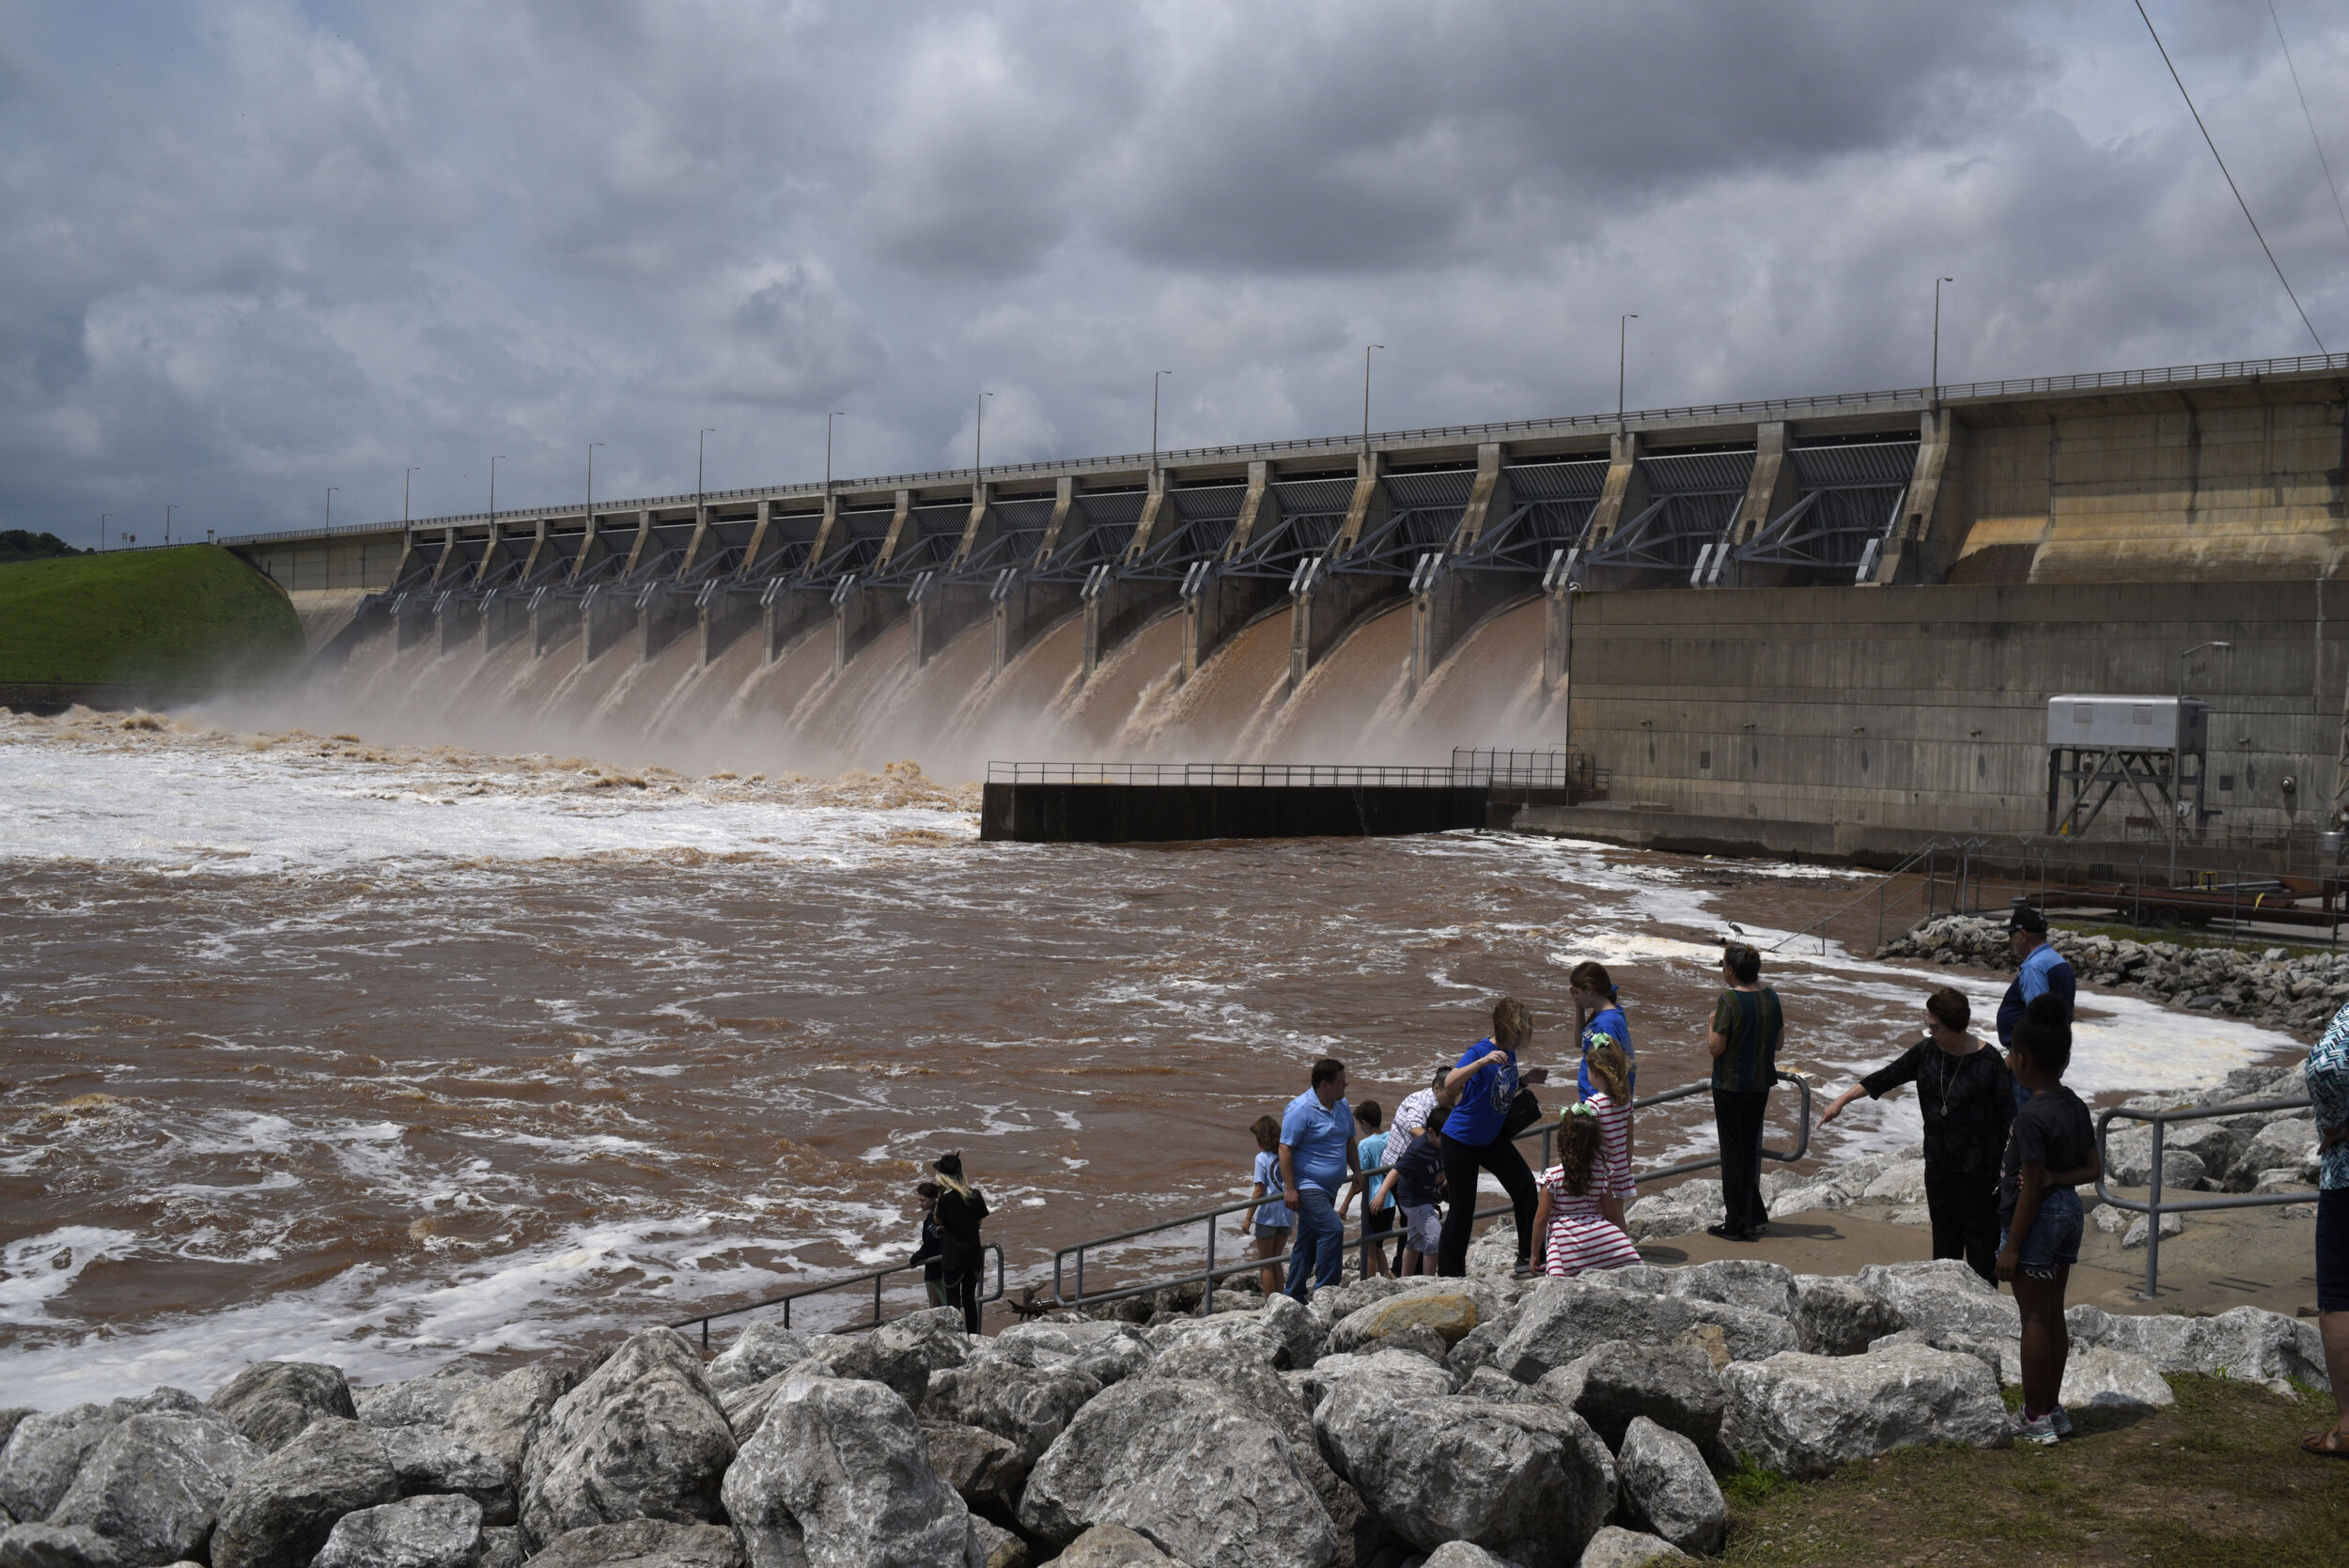  Spectators watch as water flows through Keystone Dam into the Arkansas River which has caused massive flooding downstream in Sand Springs, Oklahoma on May 24, 2019. Nick Oxford for The New York Times 